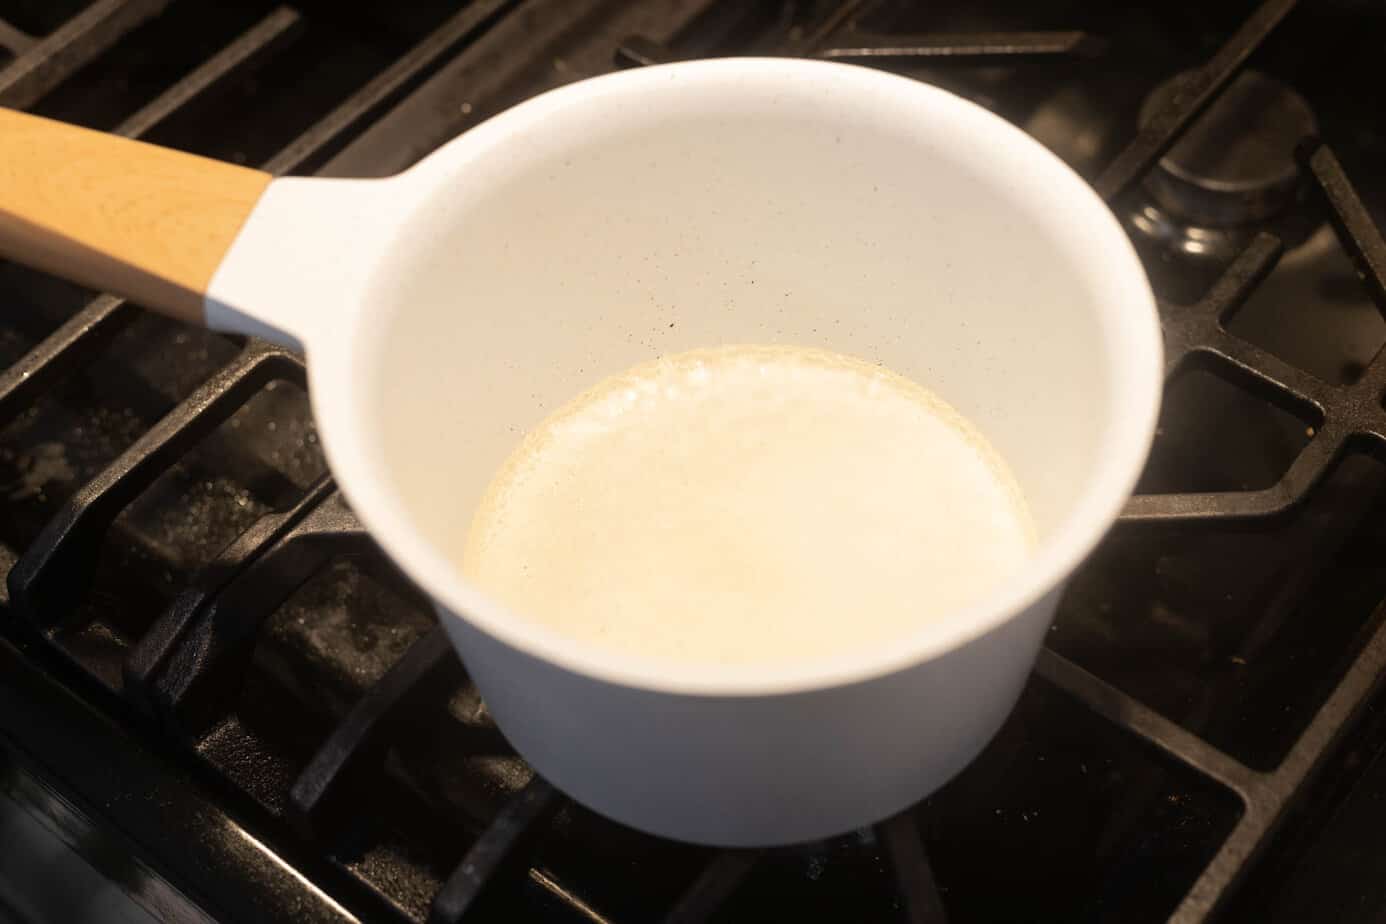 Water boiling in a white sauce pan on a burner